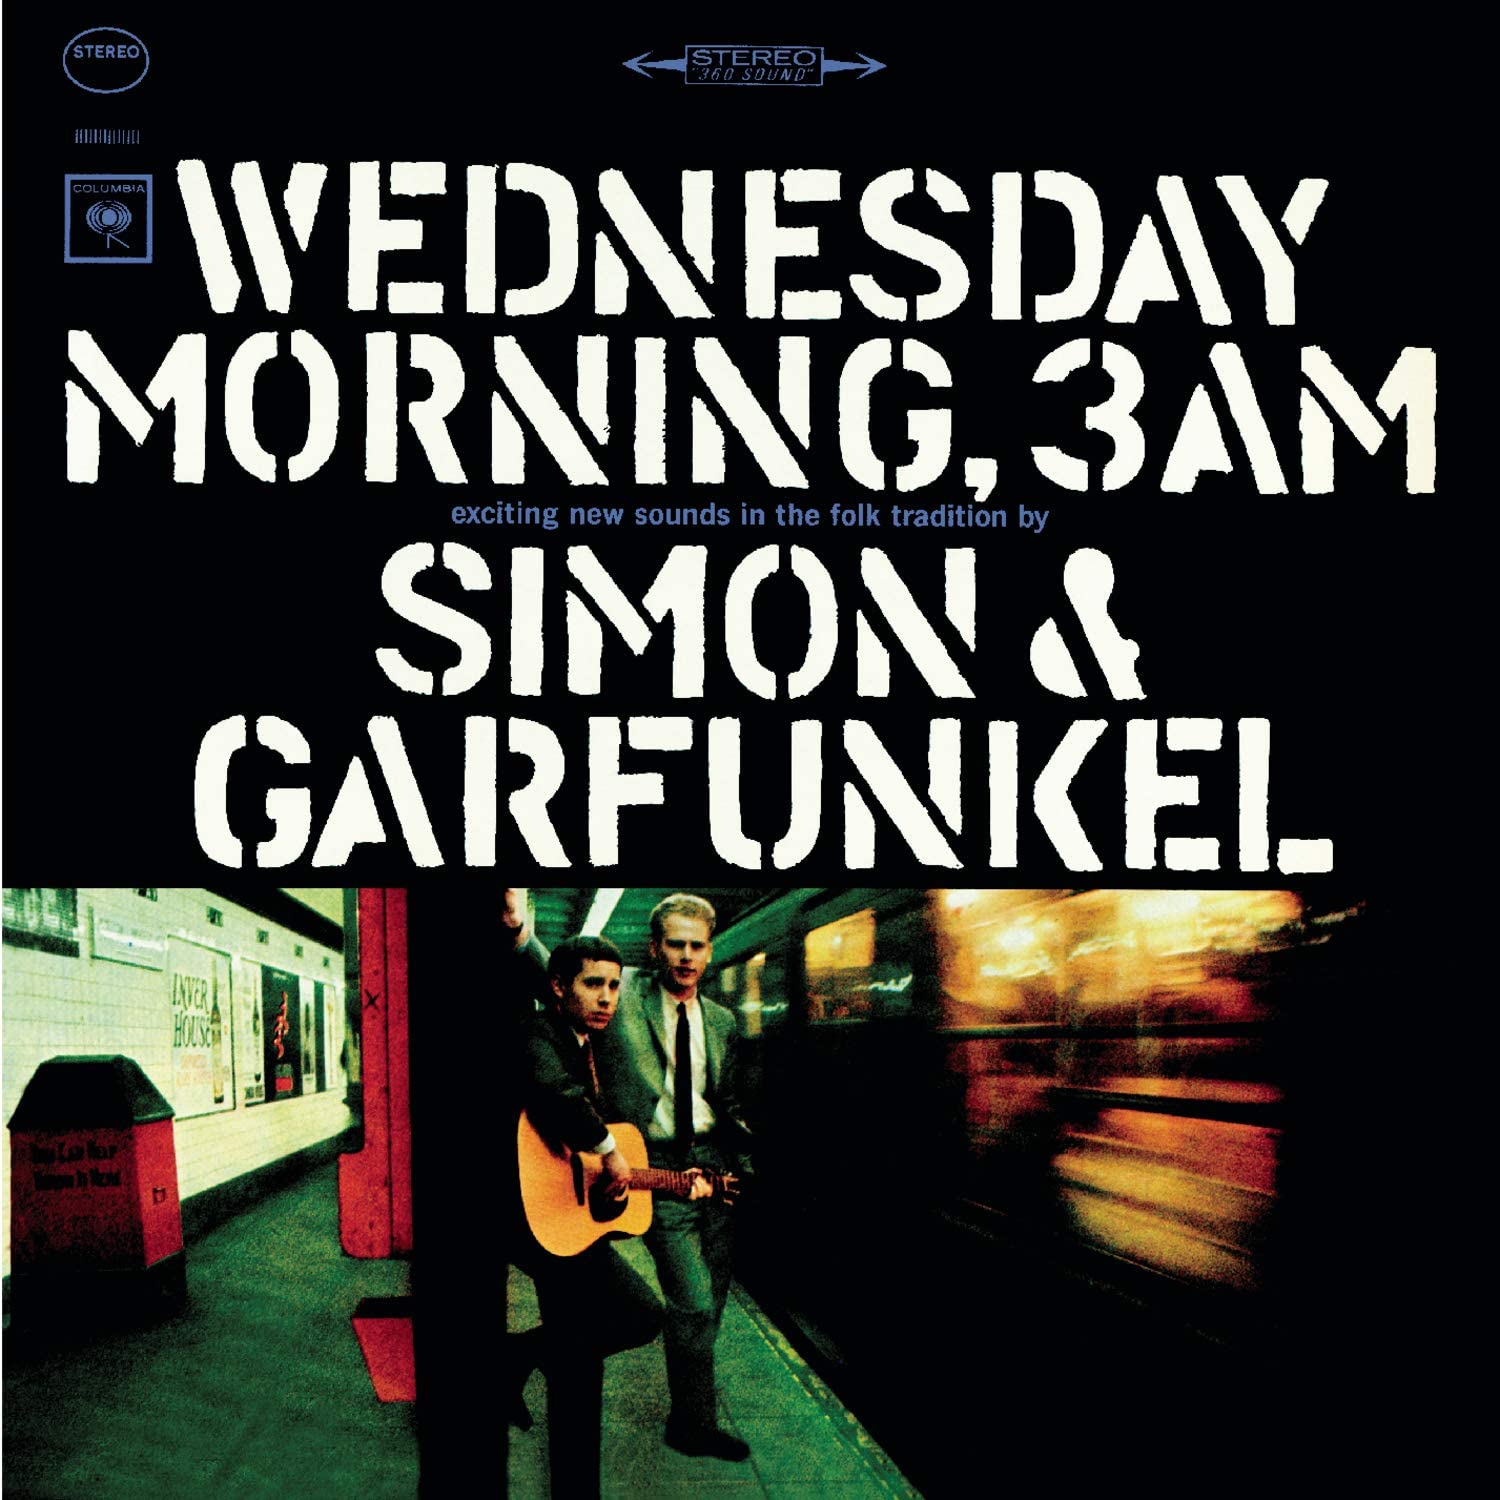 01. Wednesday Morning,3A.M. (1964)